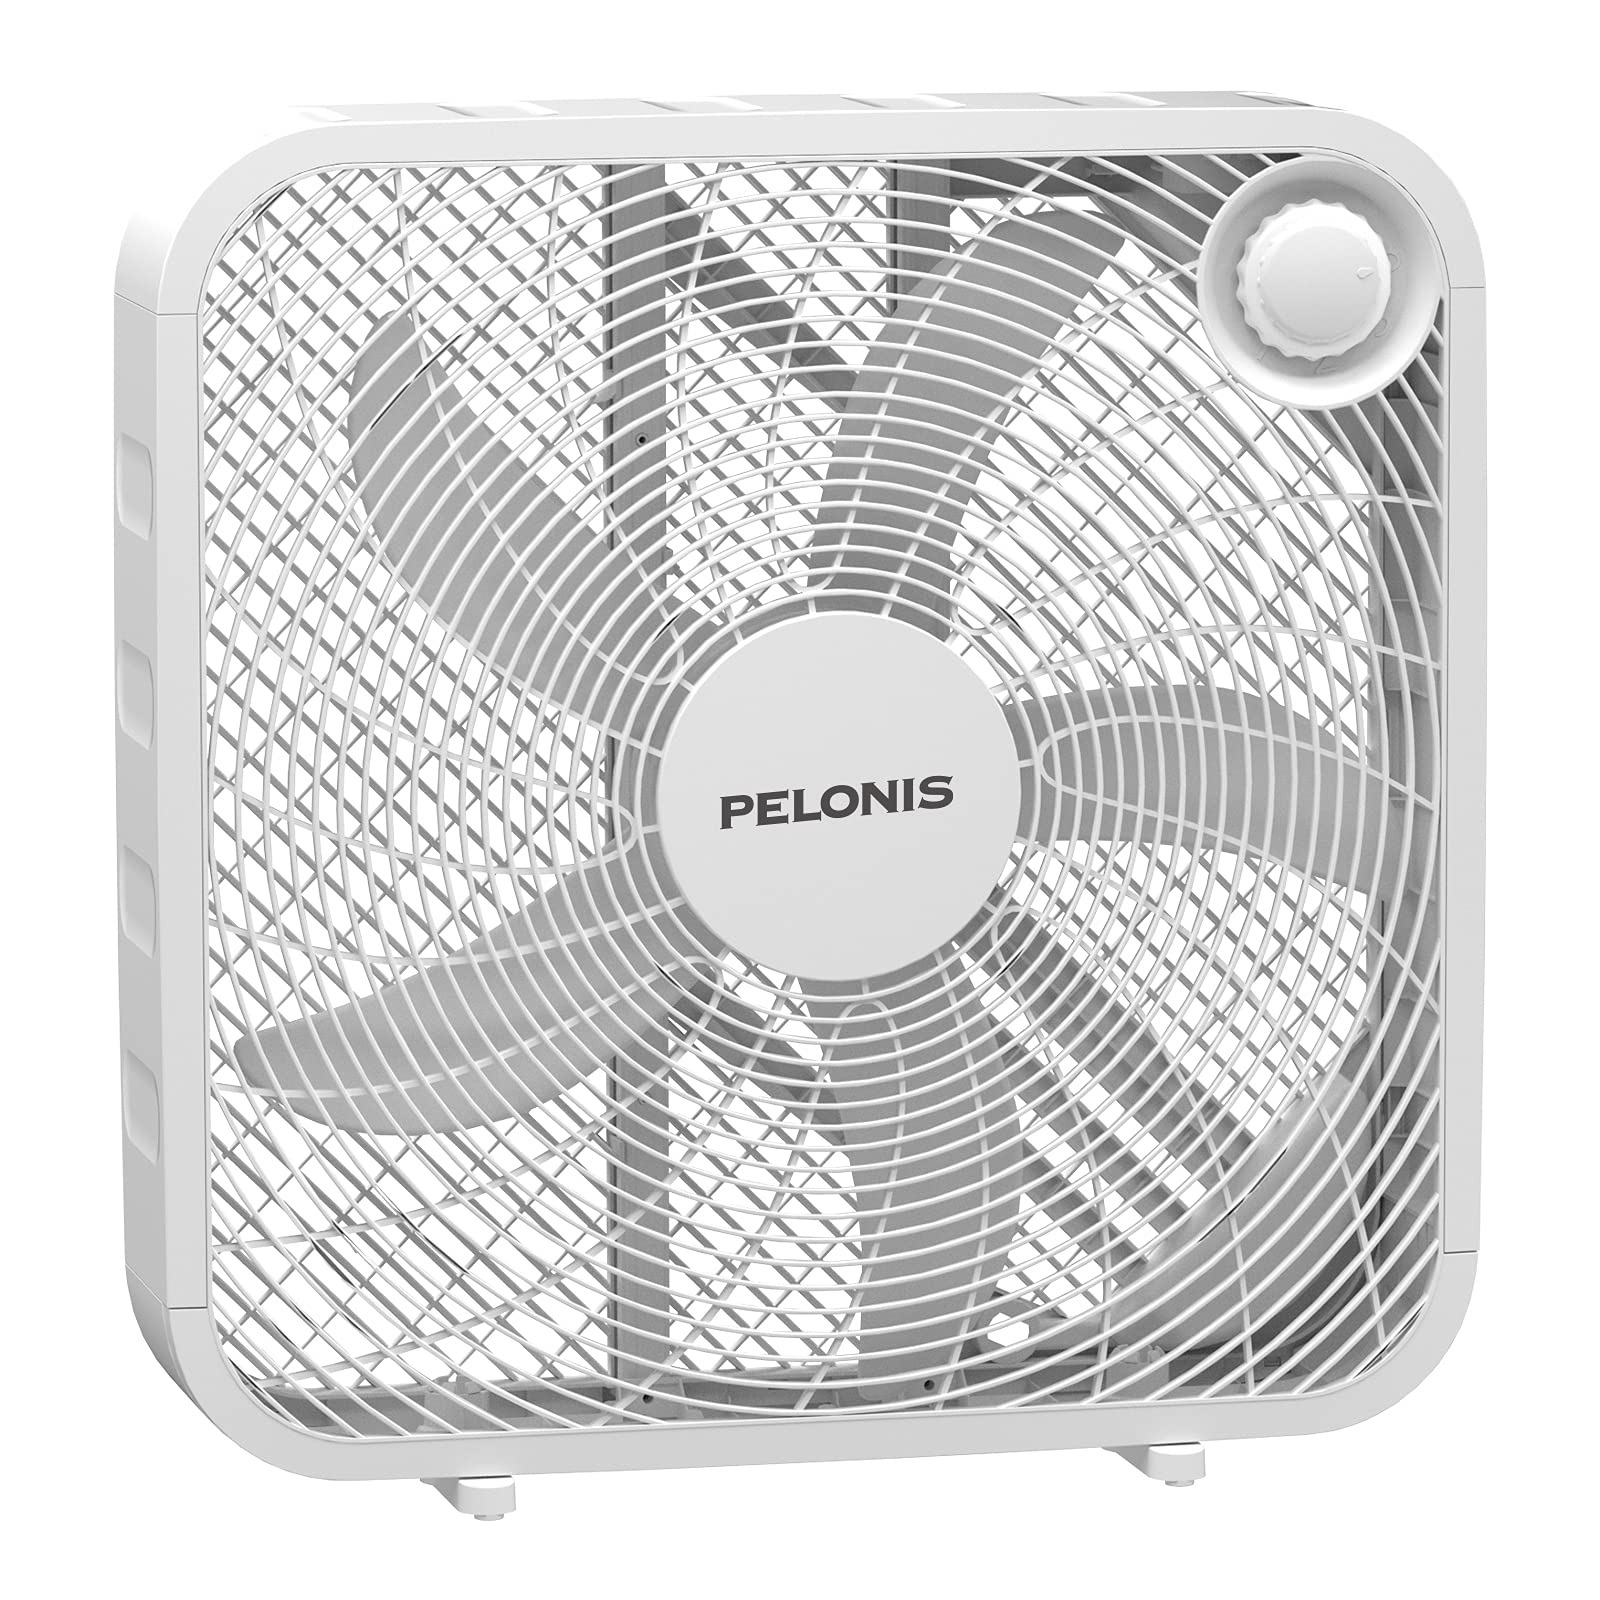 PELONIS 3-Speed Box Fan for Full-Force Circulation with Air Conditioner, White